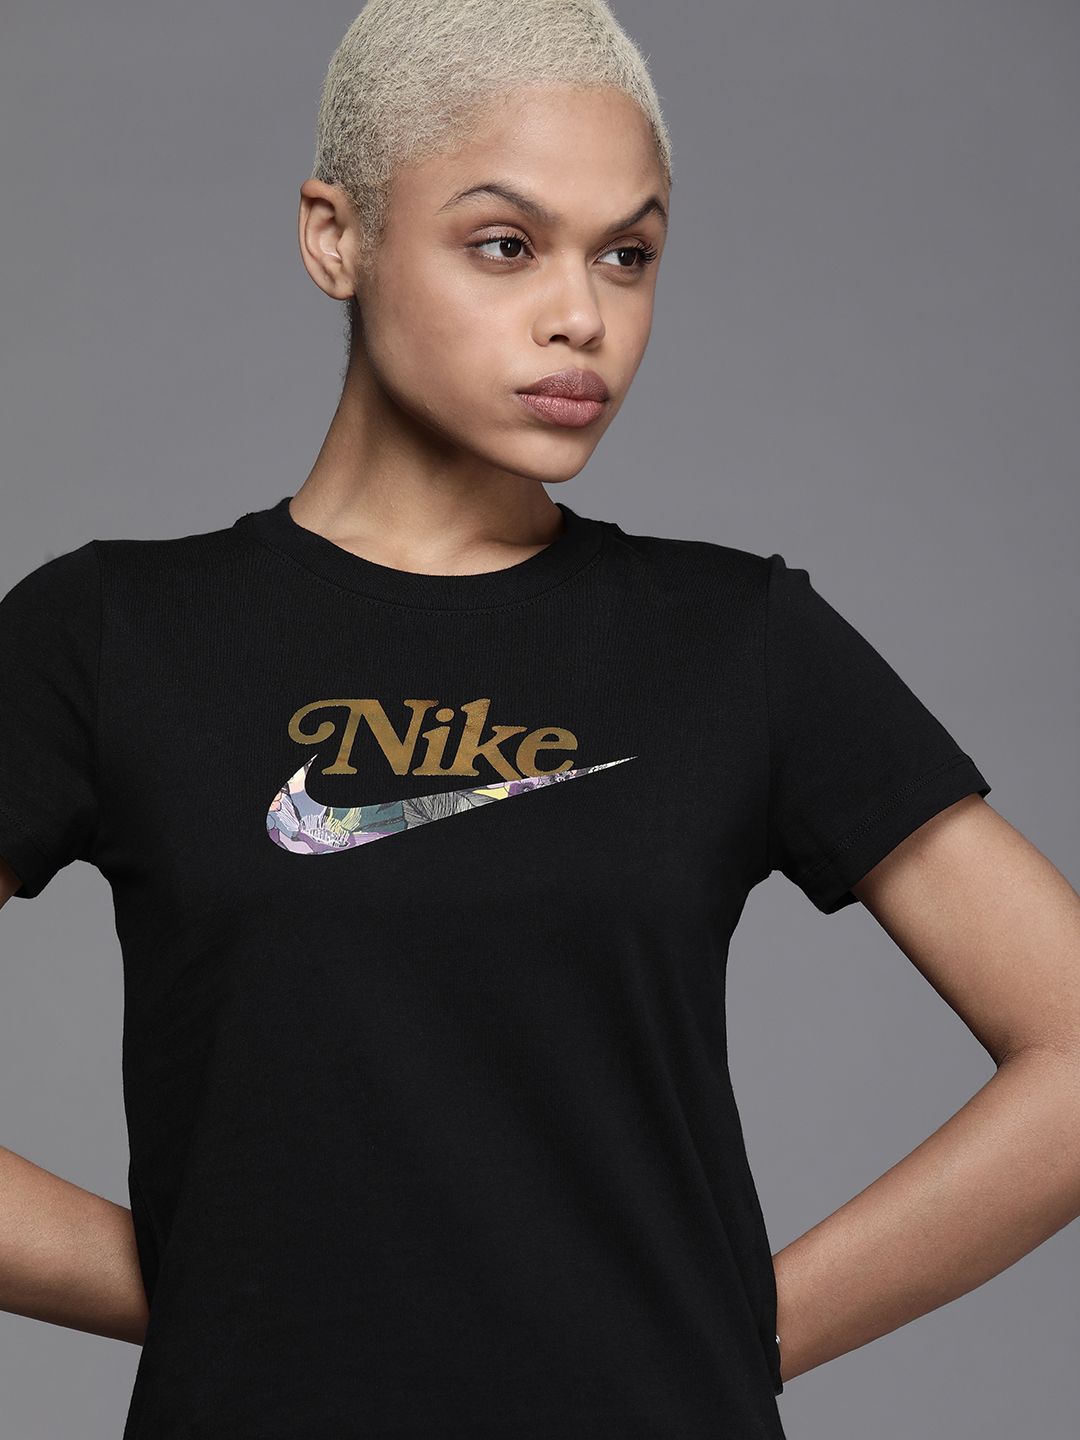 Nike Women Black & Gold-Coloured Brand Logo Printed Pure Cotton T-shirt Price in India